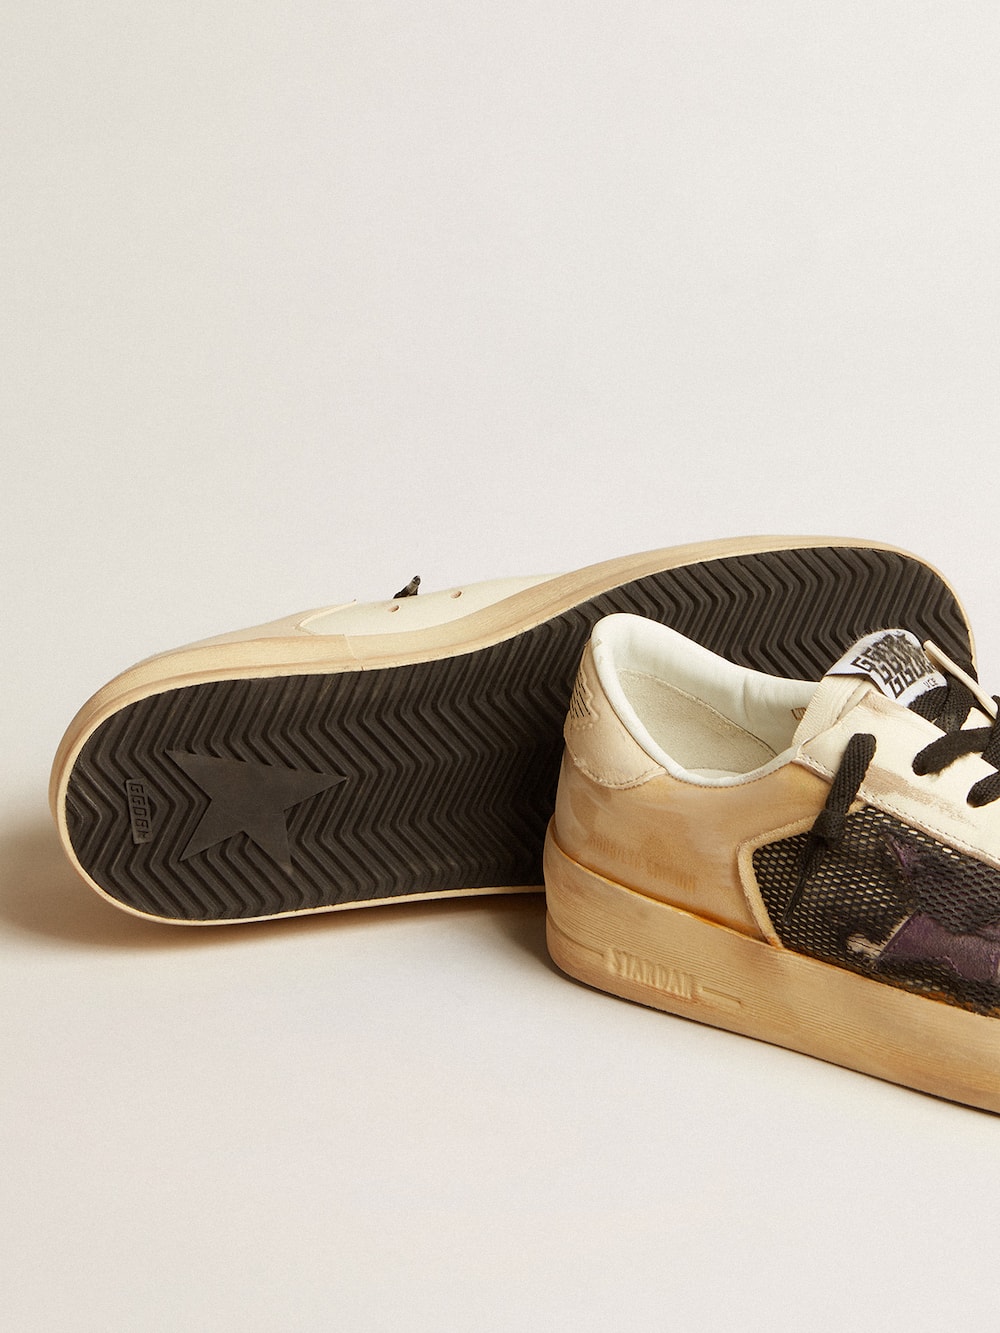 Golden Goose - Men's Stardan LAB in ecru nappa and mesh with purple leather star in 